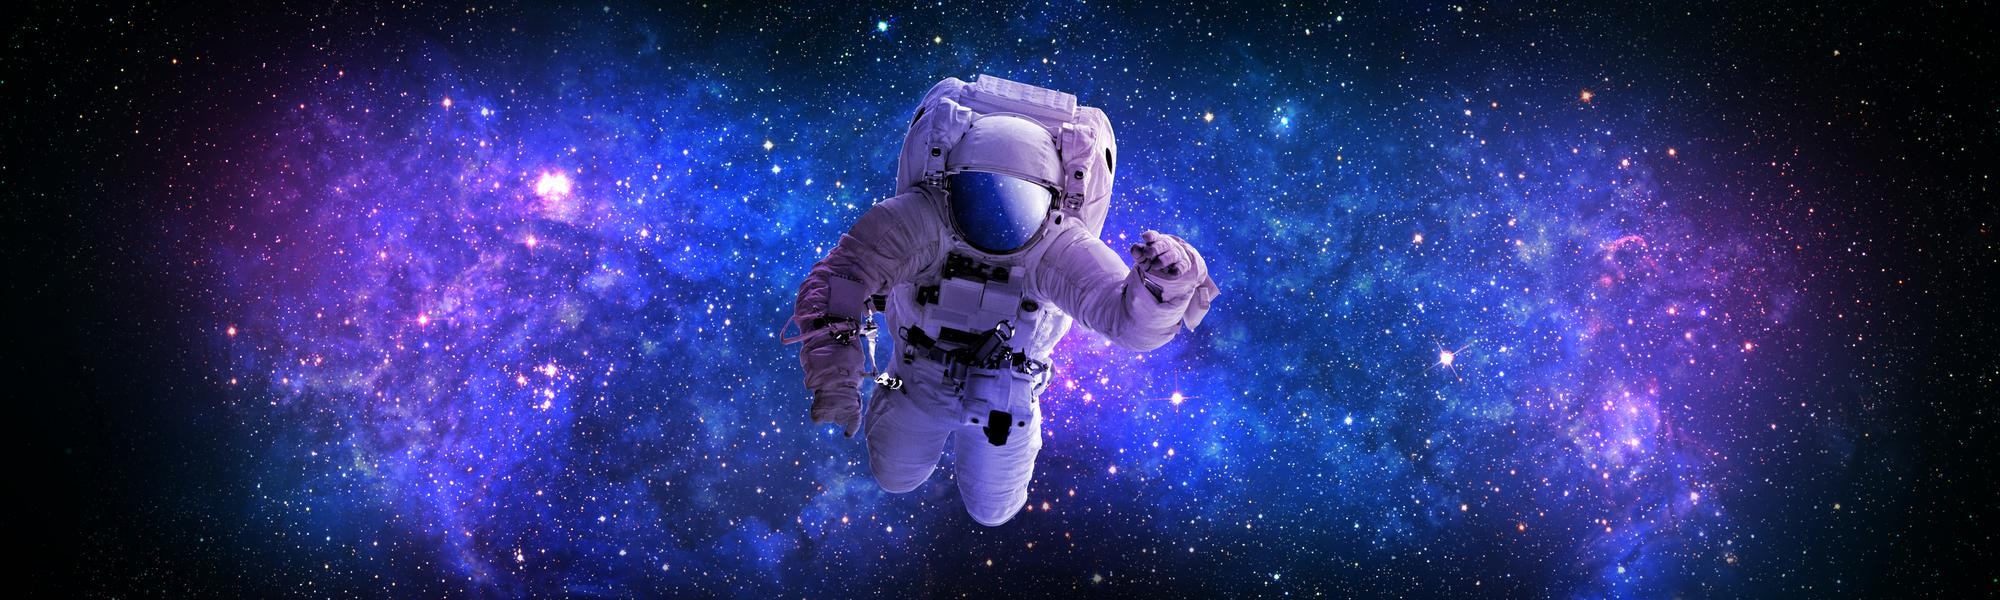 Premium Photo Astronaut flying in outeropen spacewhich is